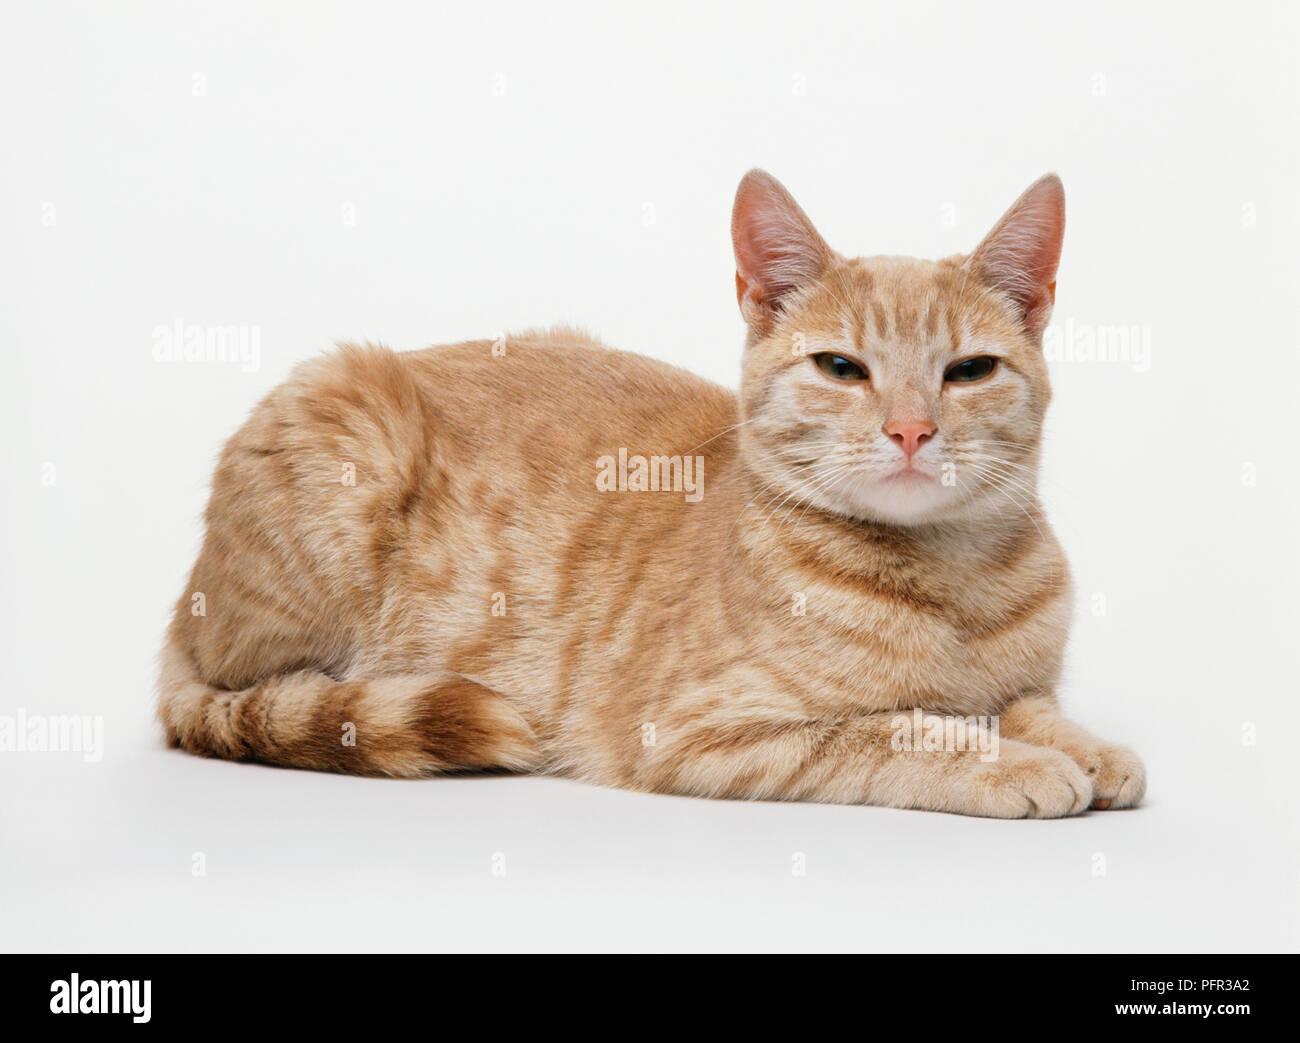 Ginger tabby cat Banque D'Images